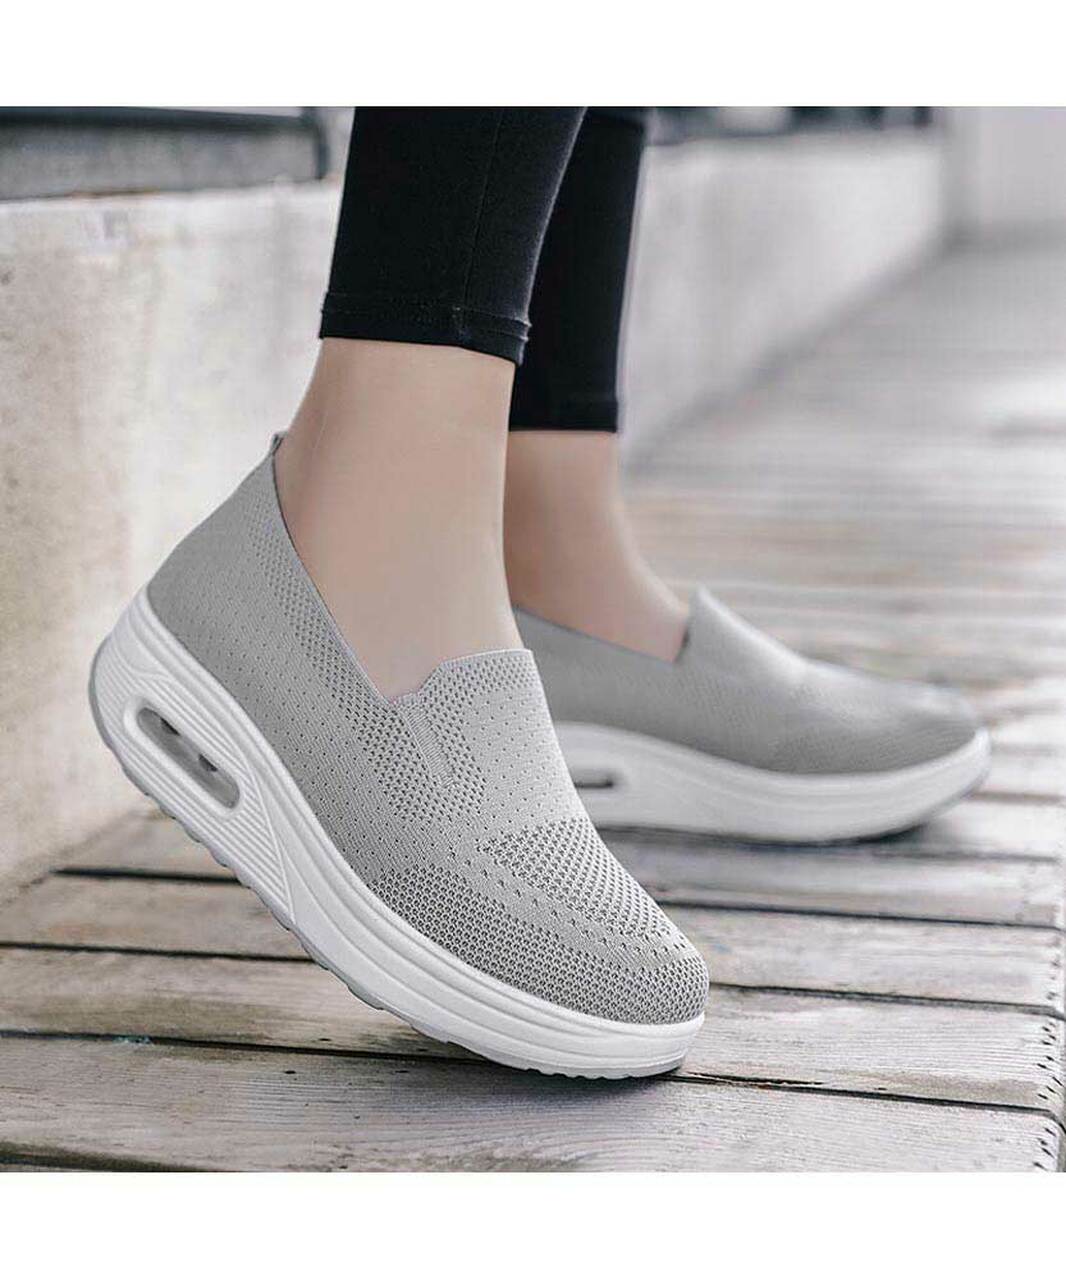 WOMEN'S ORTHOPEDIC ARCH-SUPPORT SNEAKERS – 🇦🇺 BY LUNAS AUSTRALIA 🇦🇺